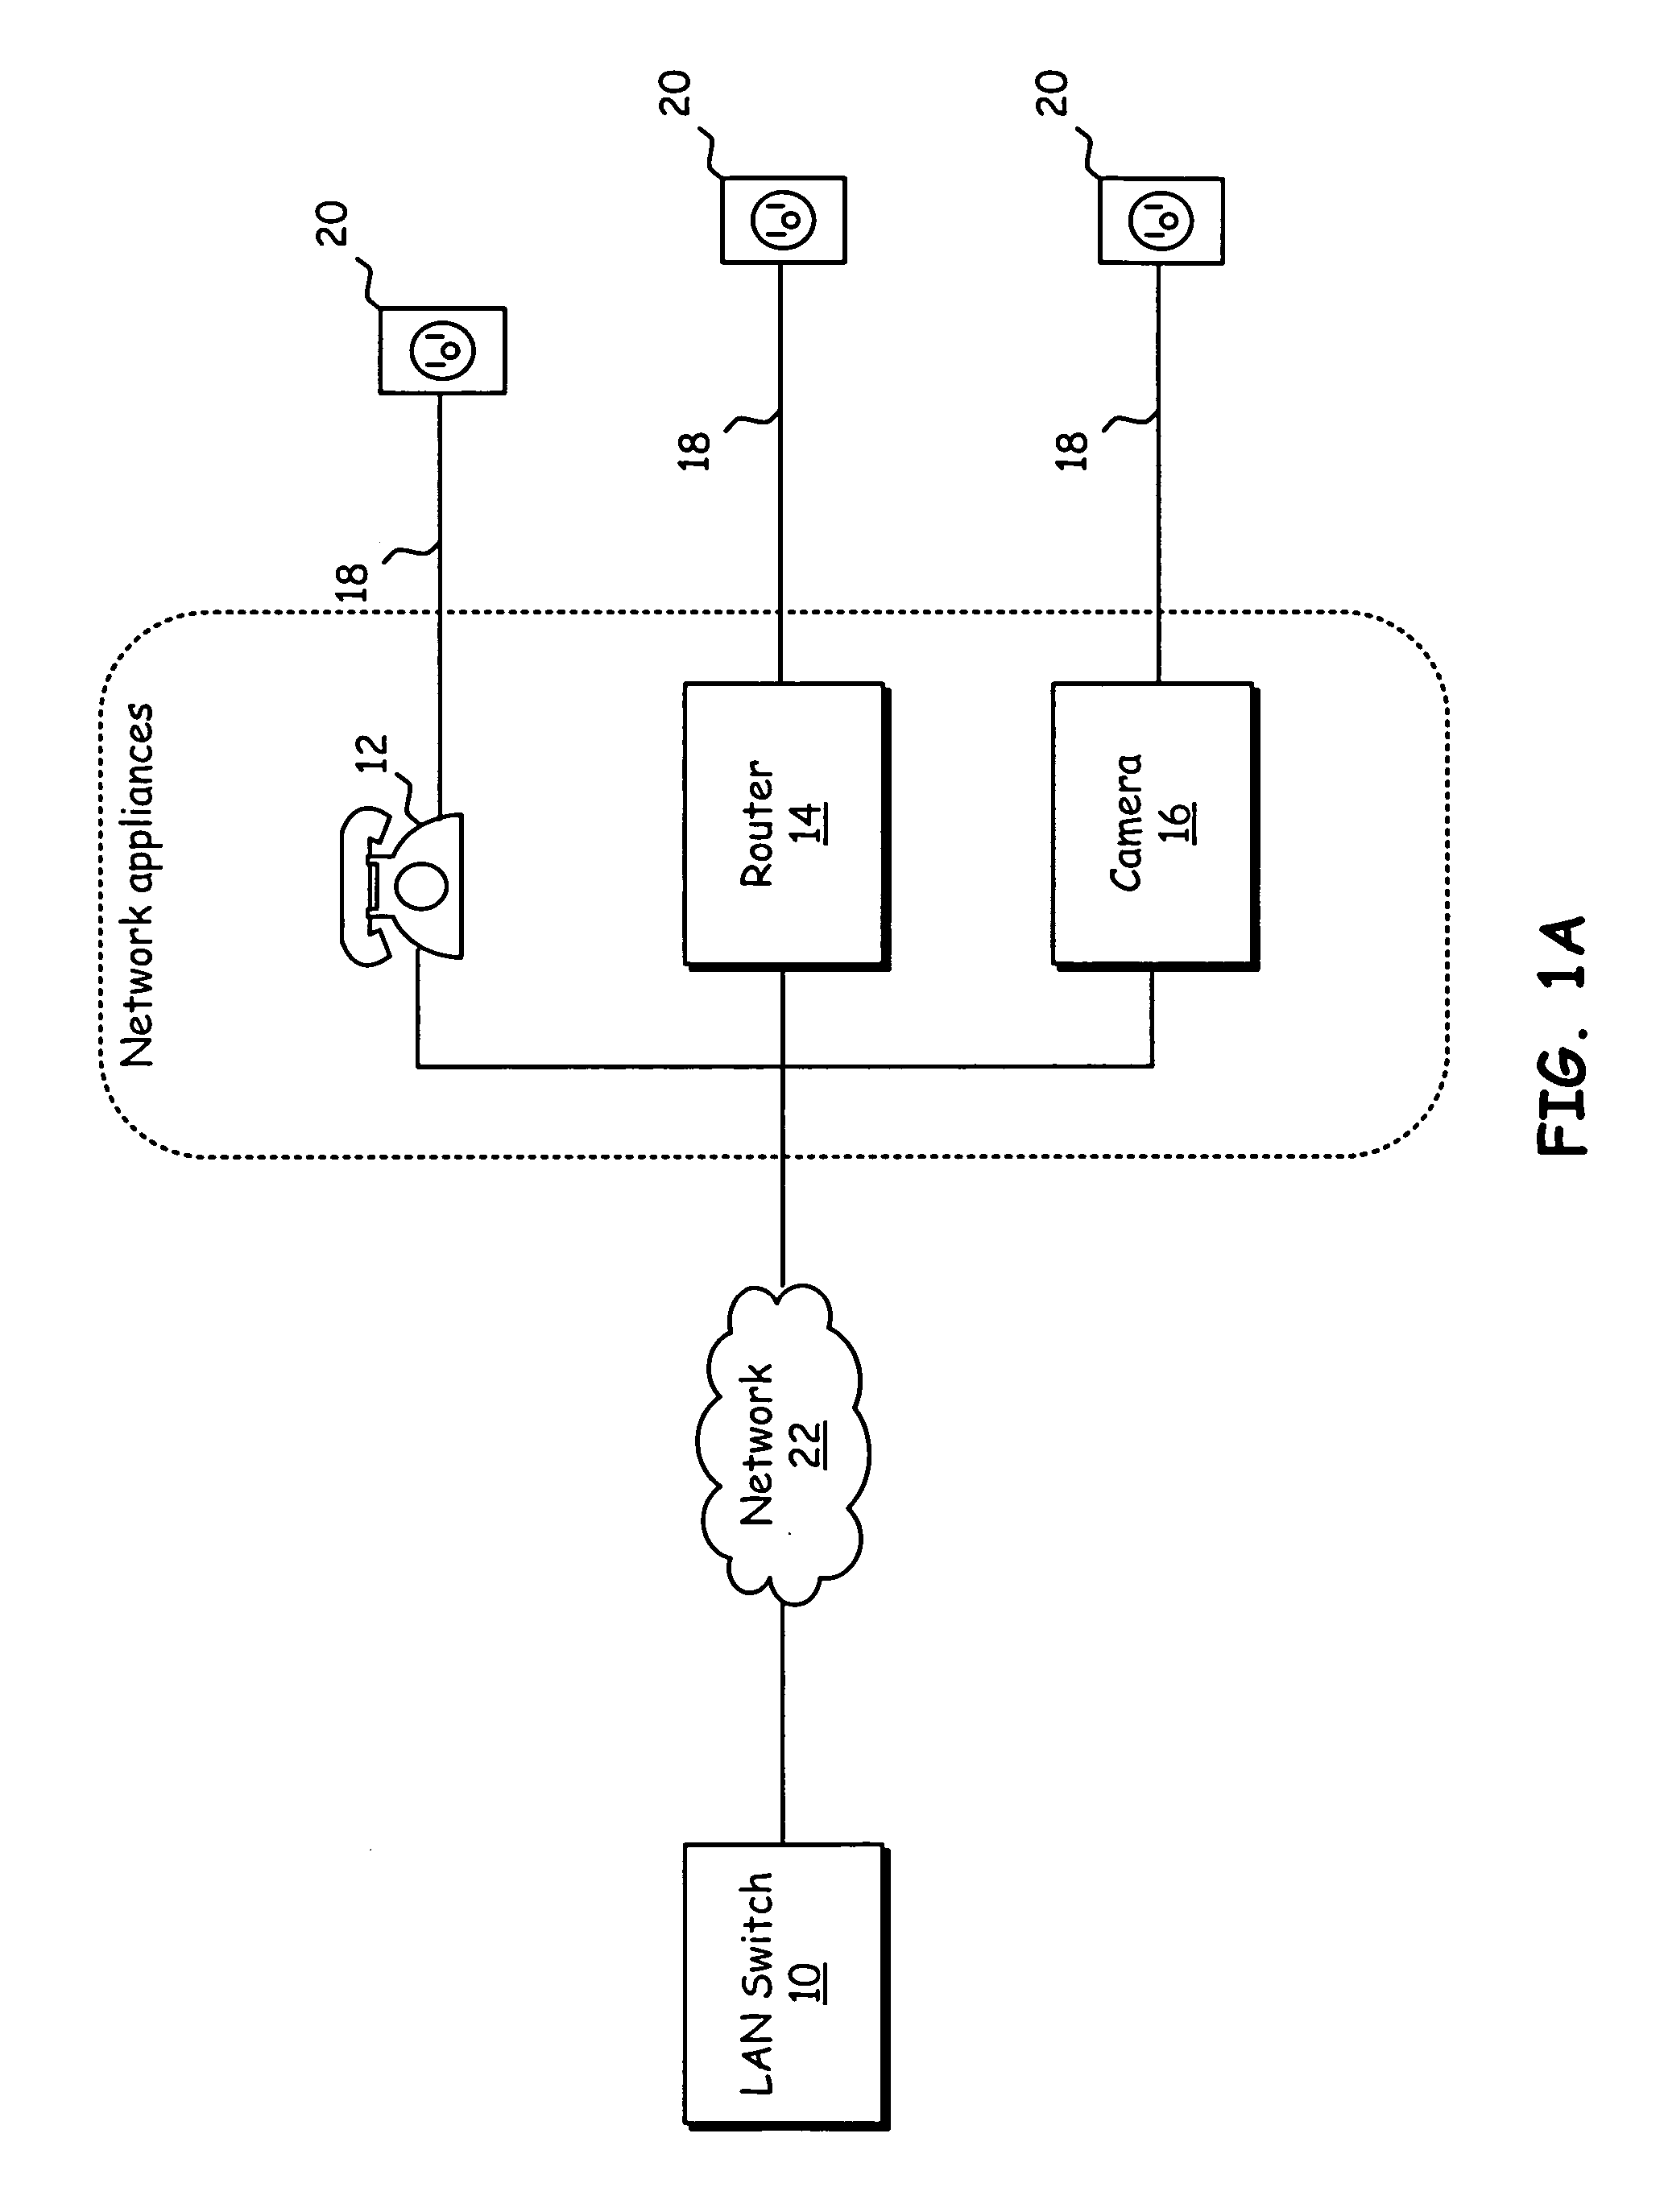 Method for dynamic insertion loss control for 10/100/1000 mhz ethernet signaling